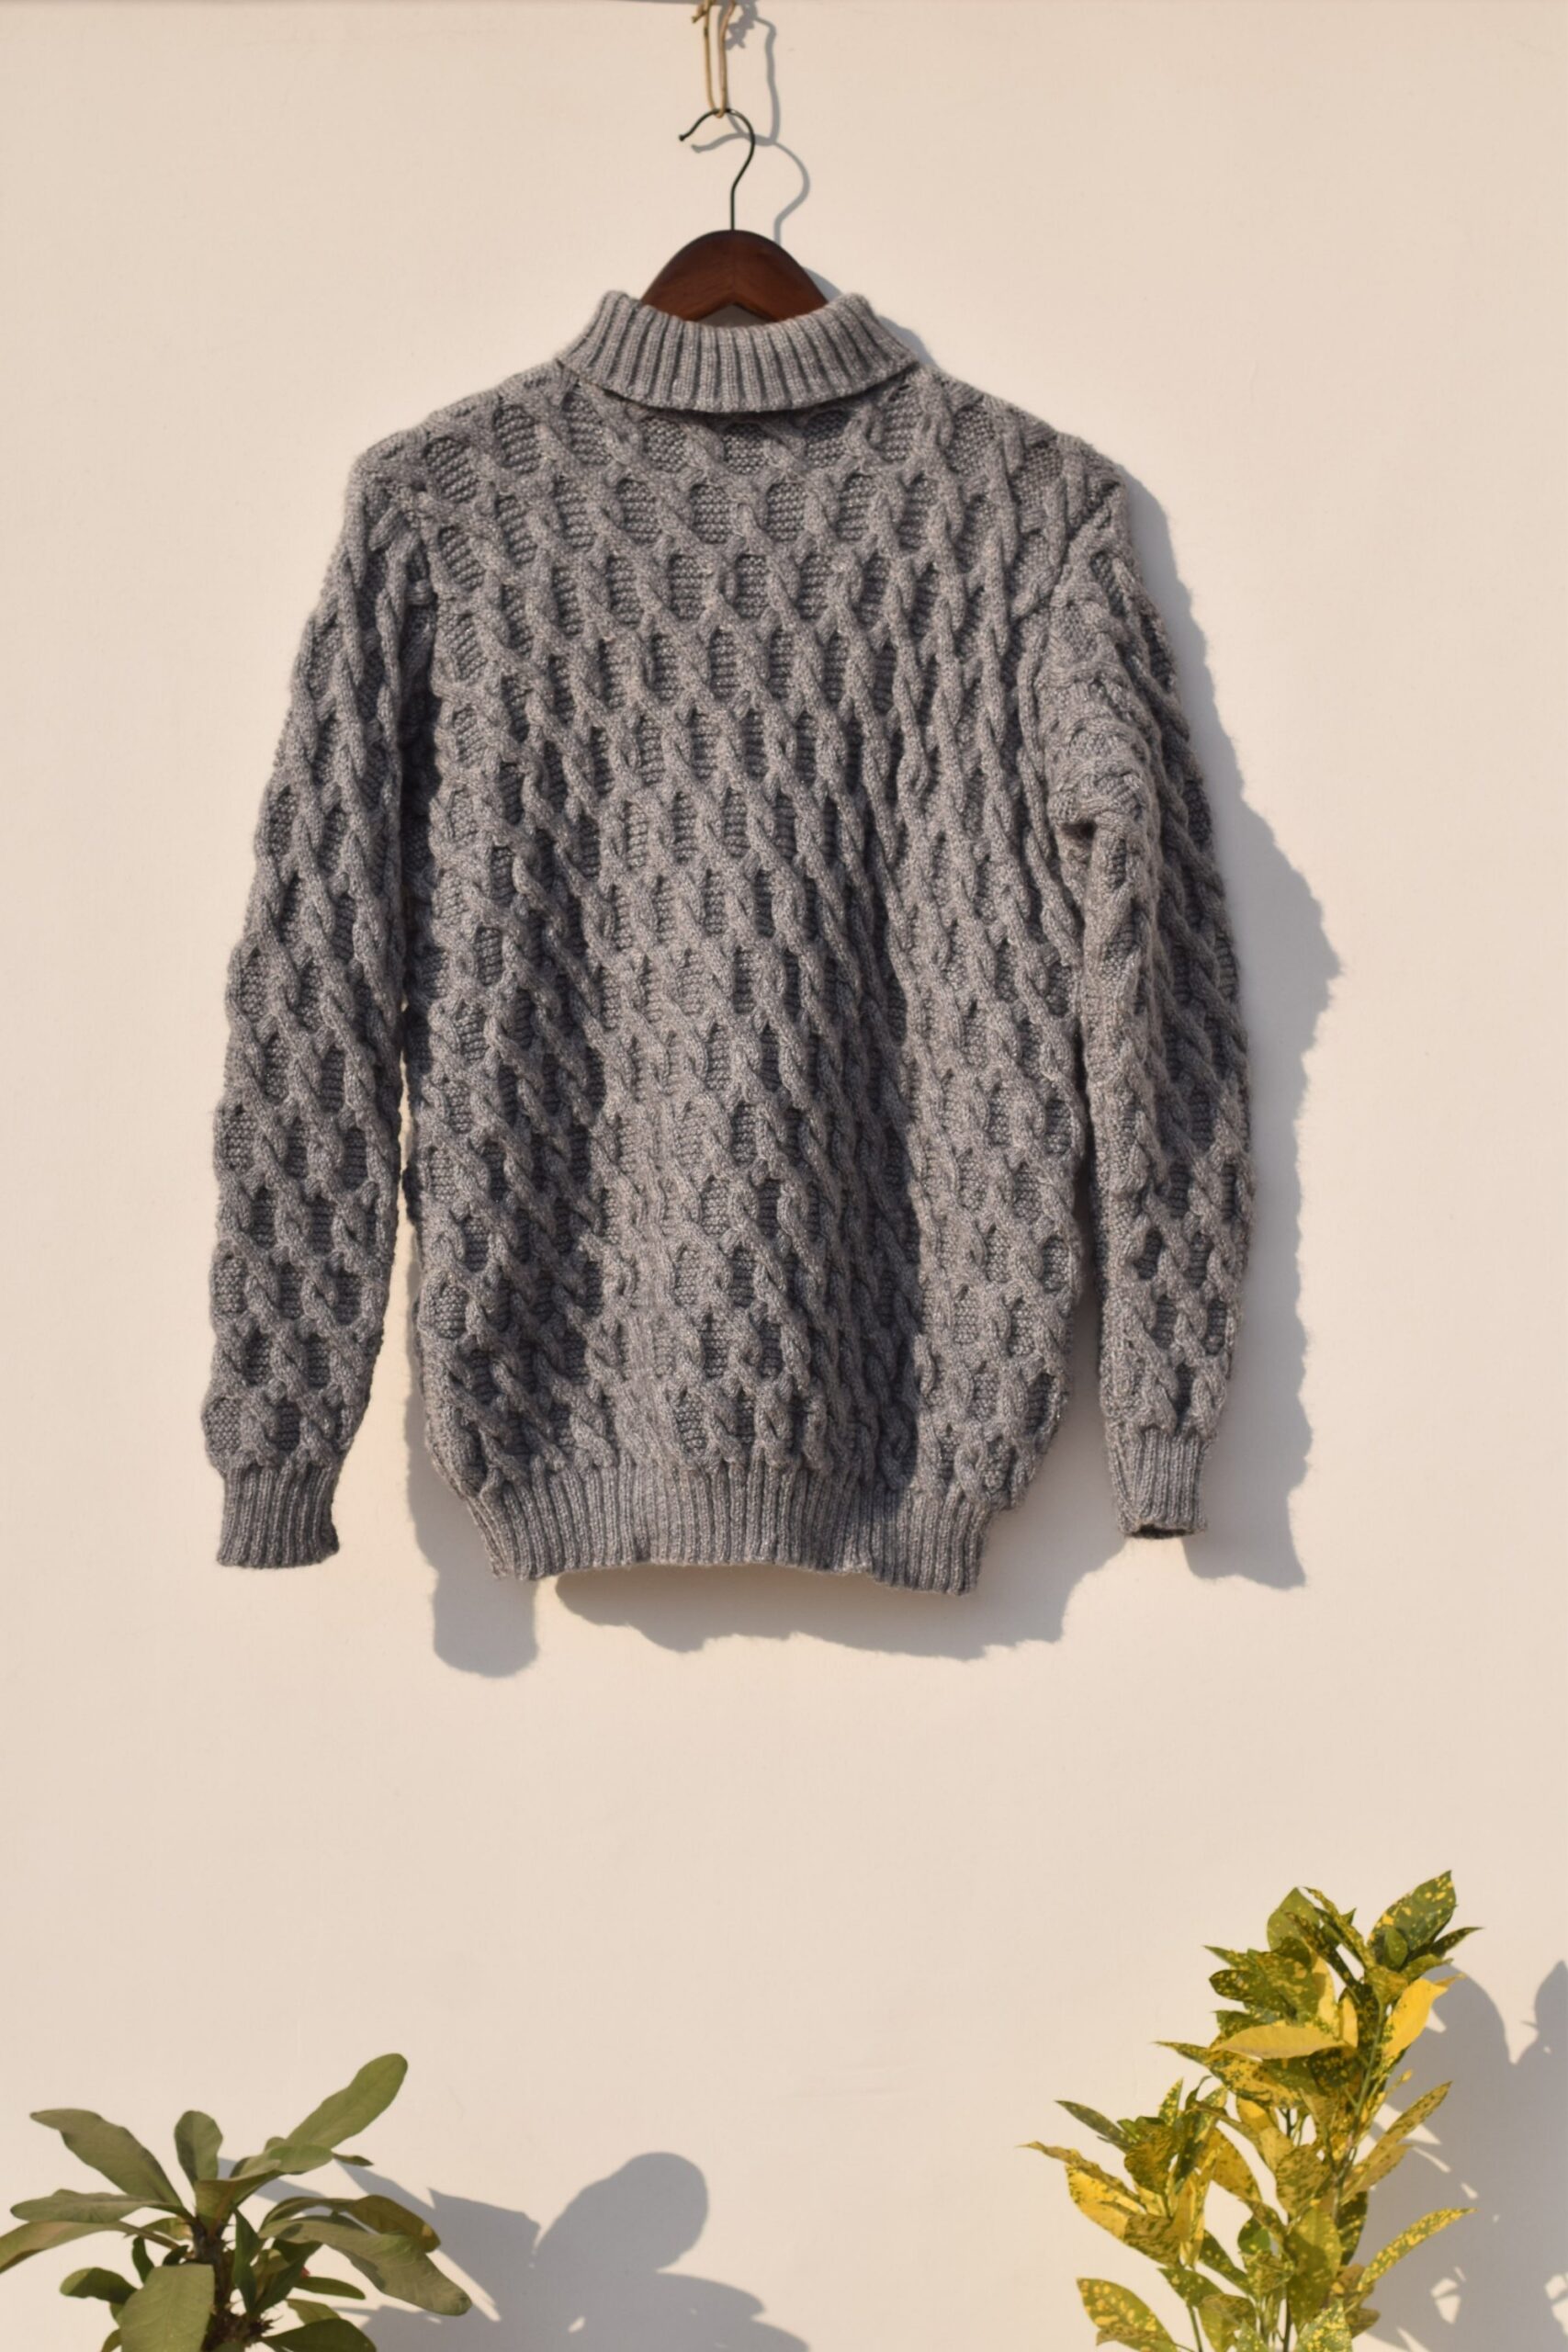 Grey handknitted cable design sweater